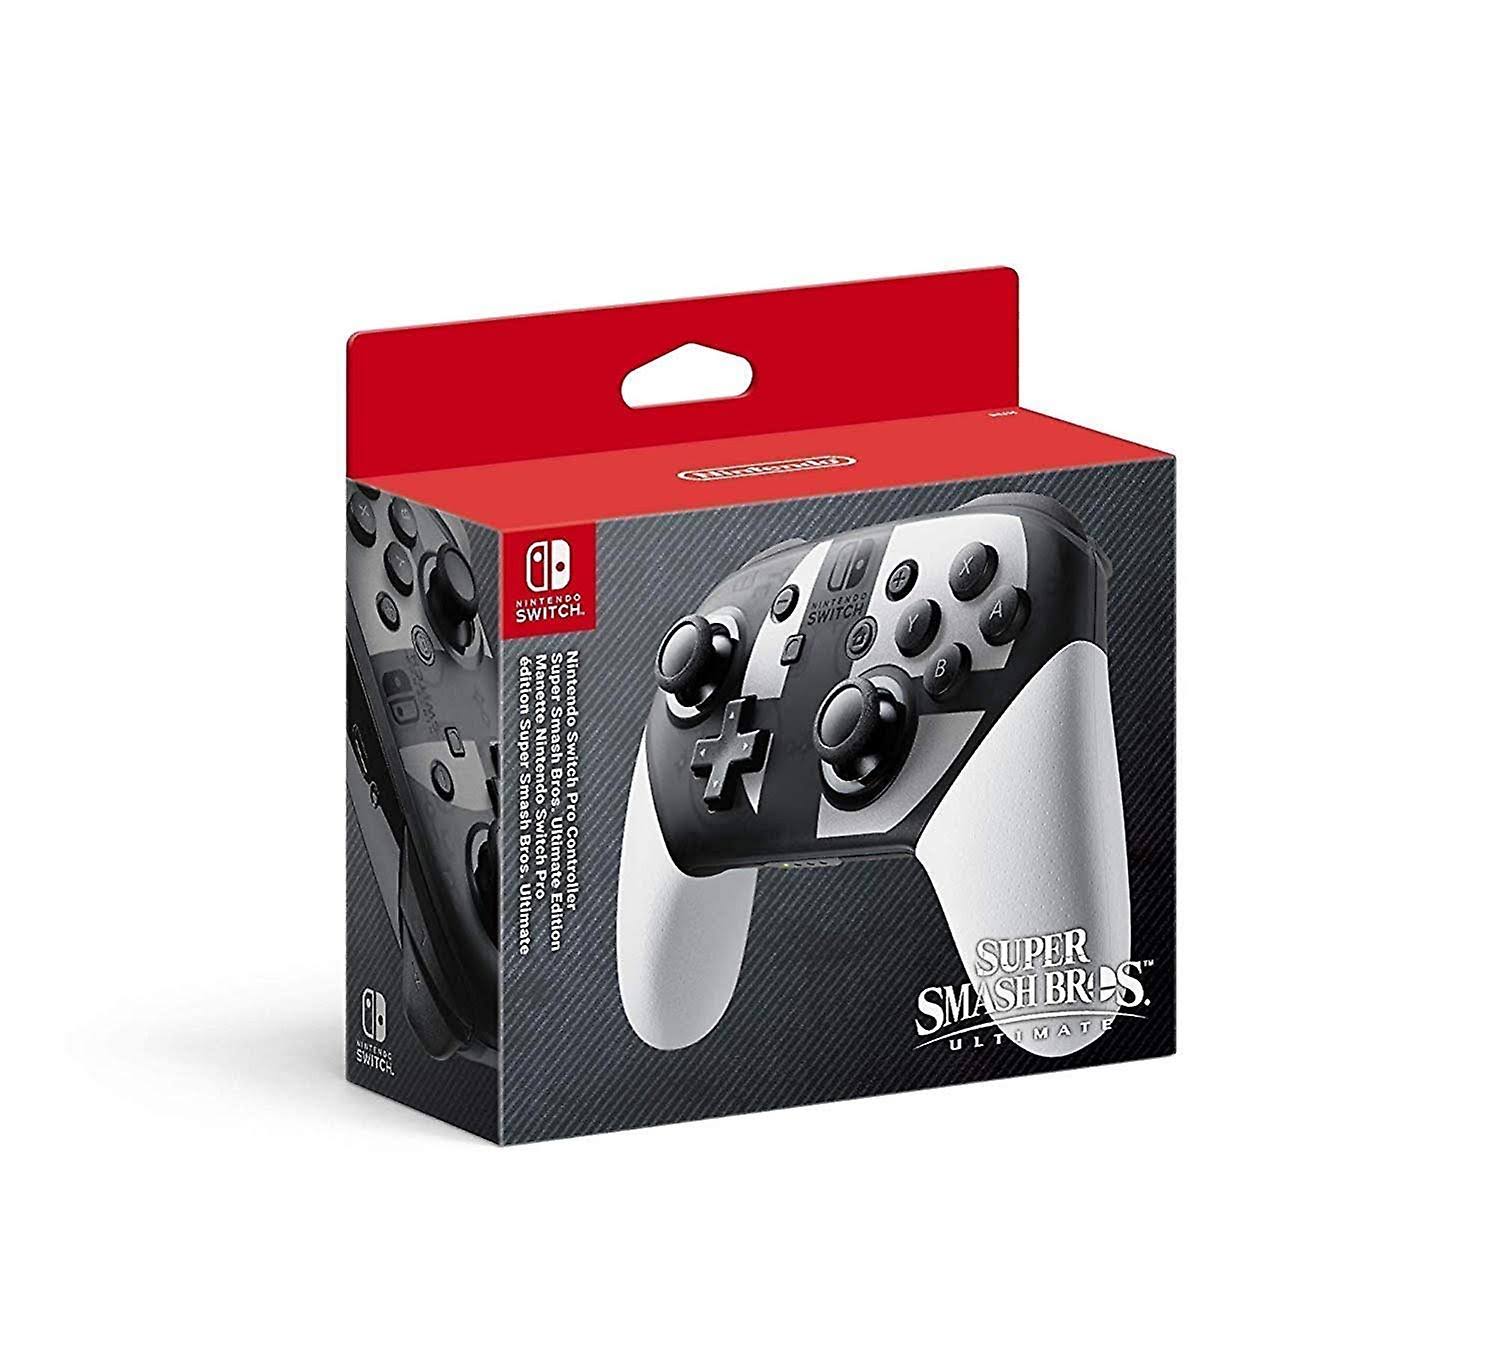 Nintendo Switch Pro Wireless Controller Super Smash Brothers Ultimate Edition